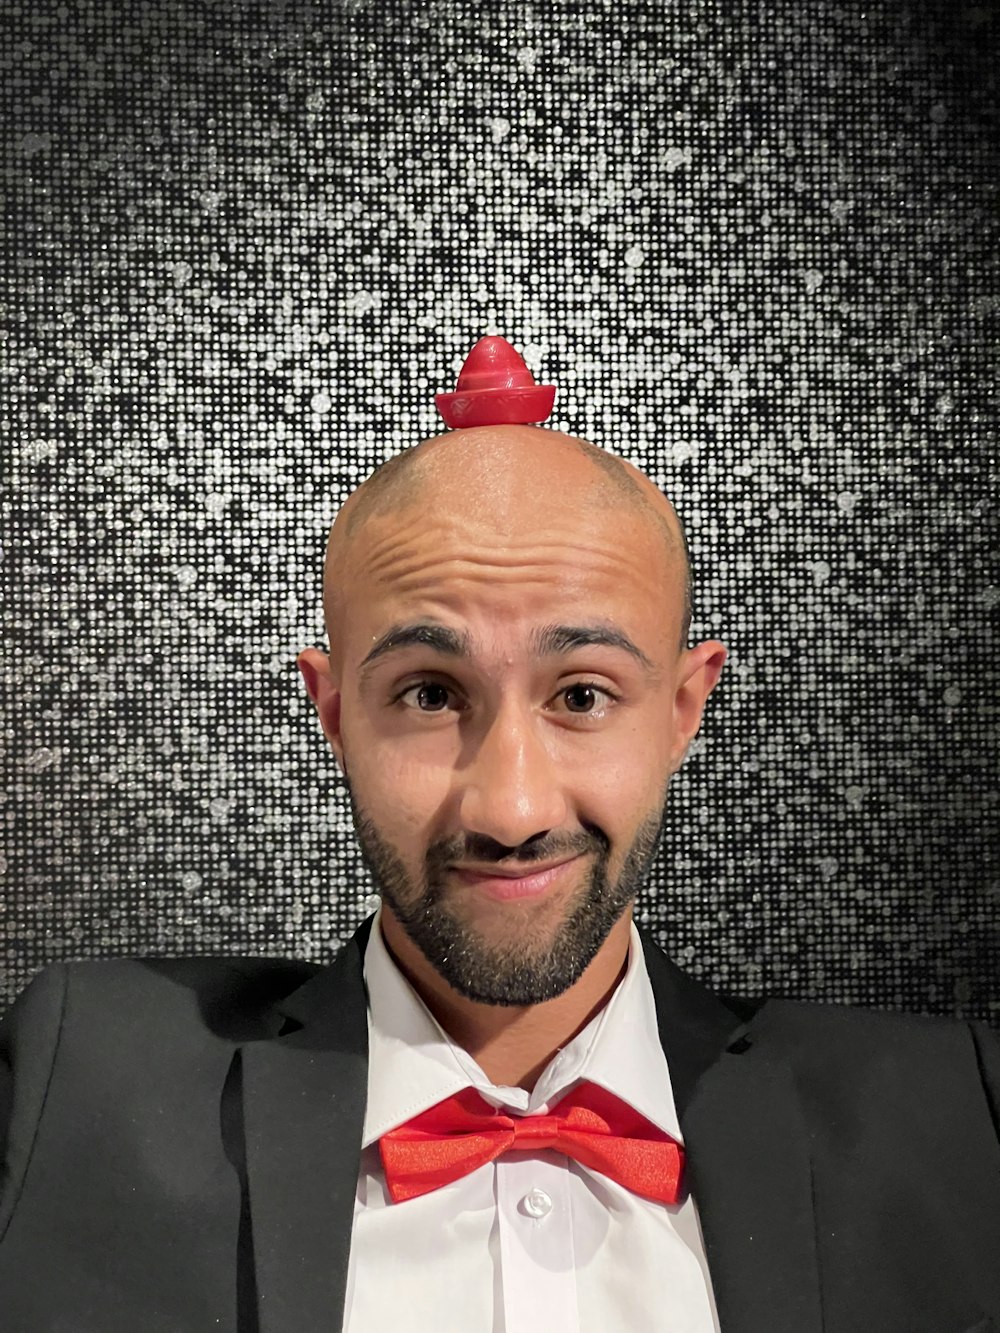 a man with a bald head wearing a red bow tie